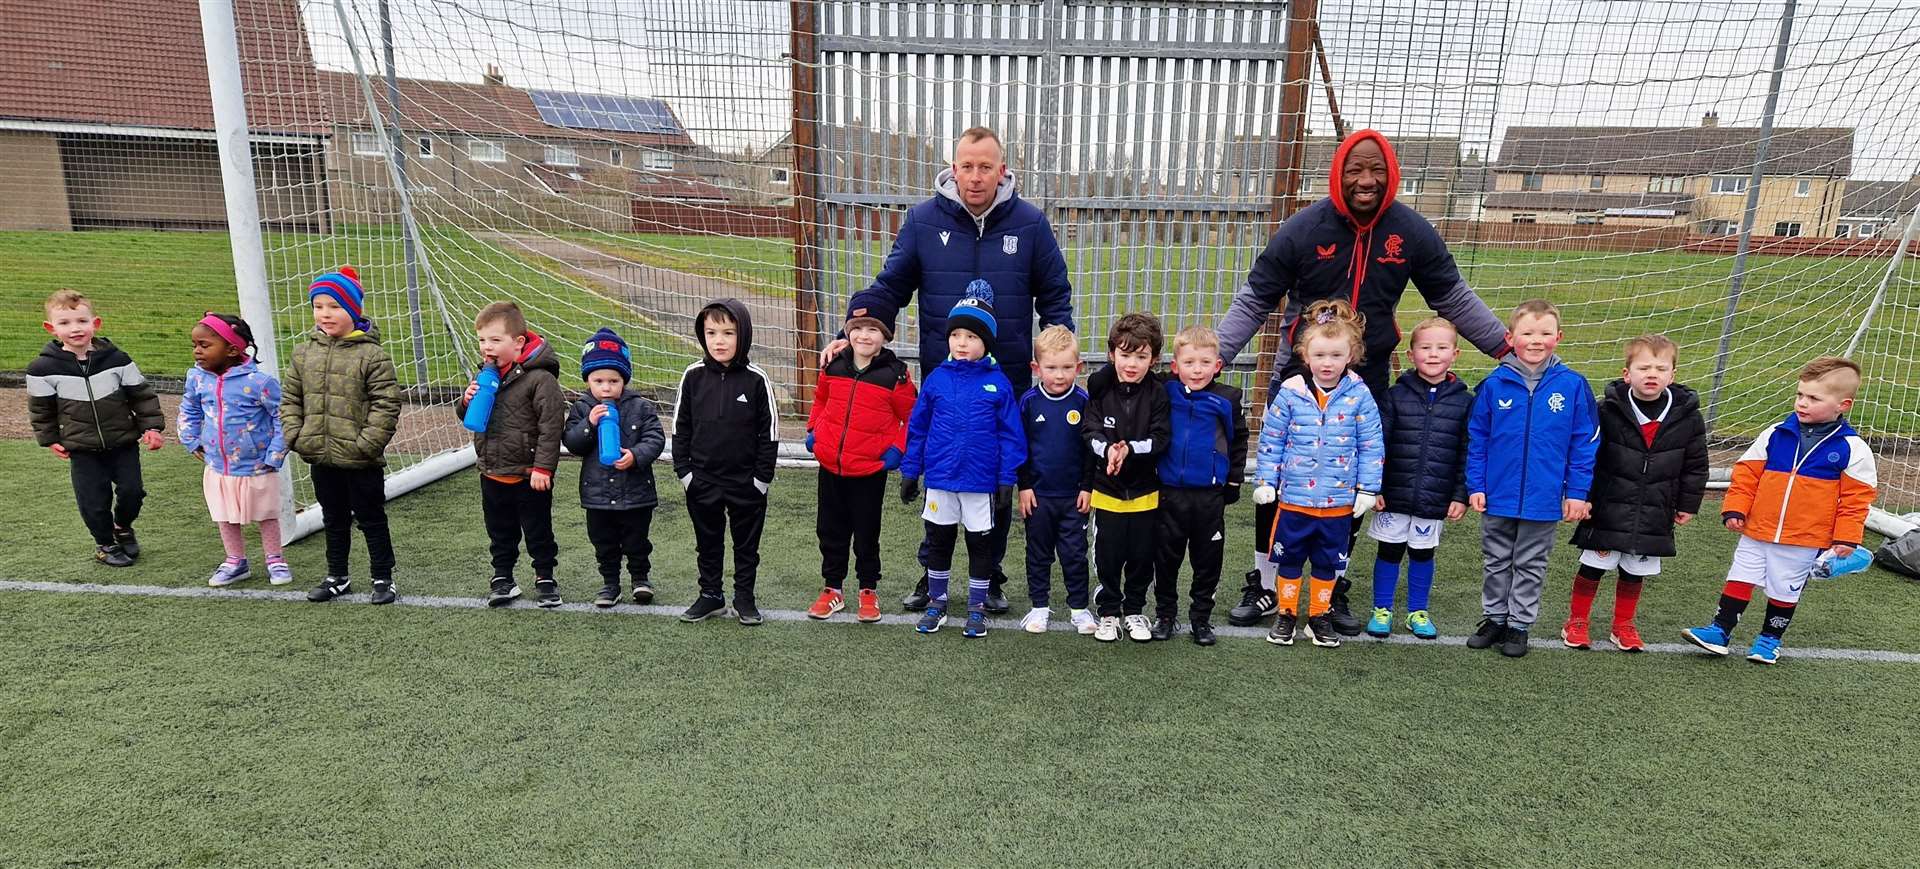 Stephen Wright and Marvin Andrews with children in the 3-5 age group at the Thurso Football Academy event.